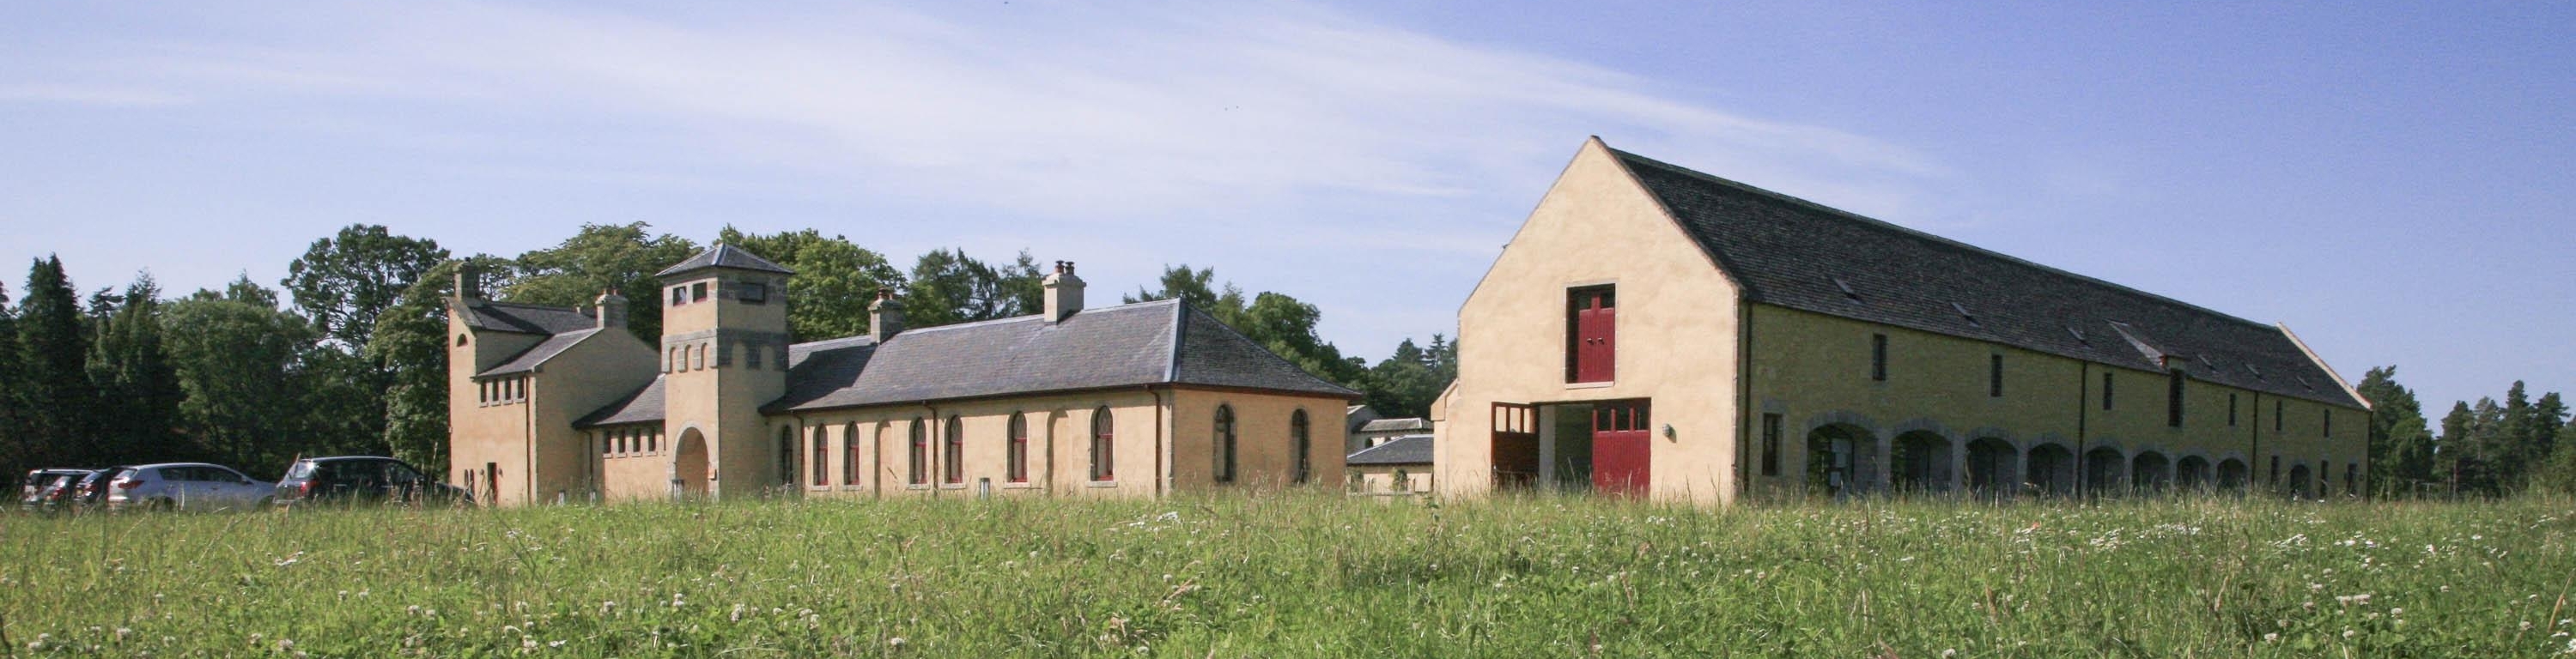 Blair's Home Farm on the Altyre estate, renovated for use by the Glasgow School of Art